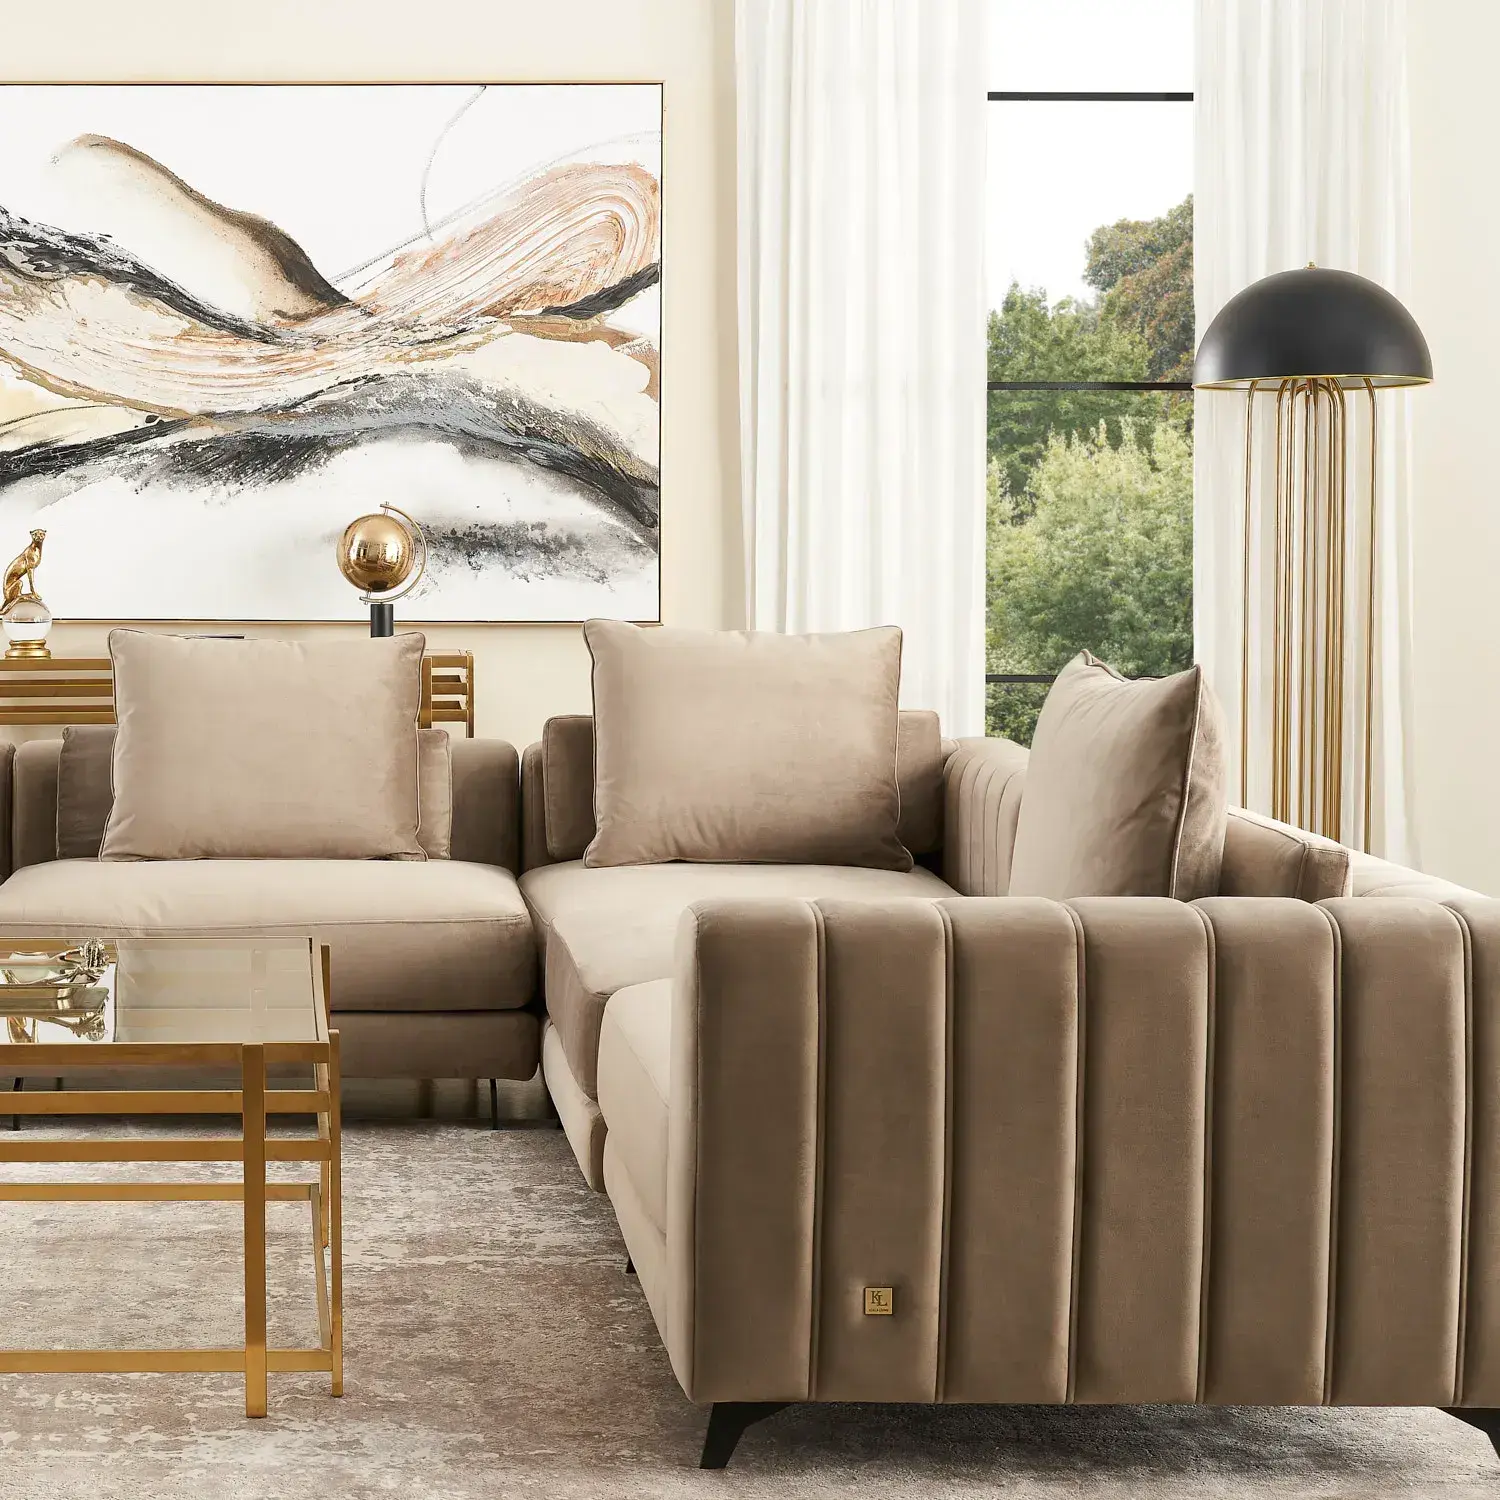 The Art of Arranging Furniture For An Open Living Space